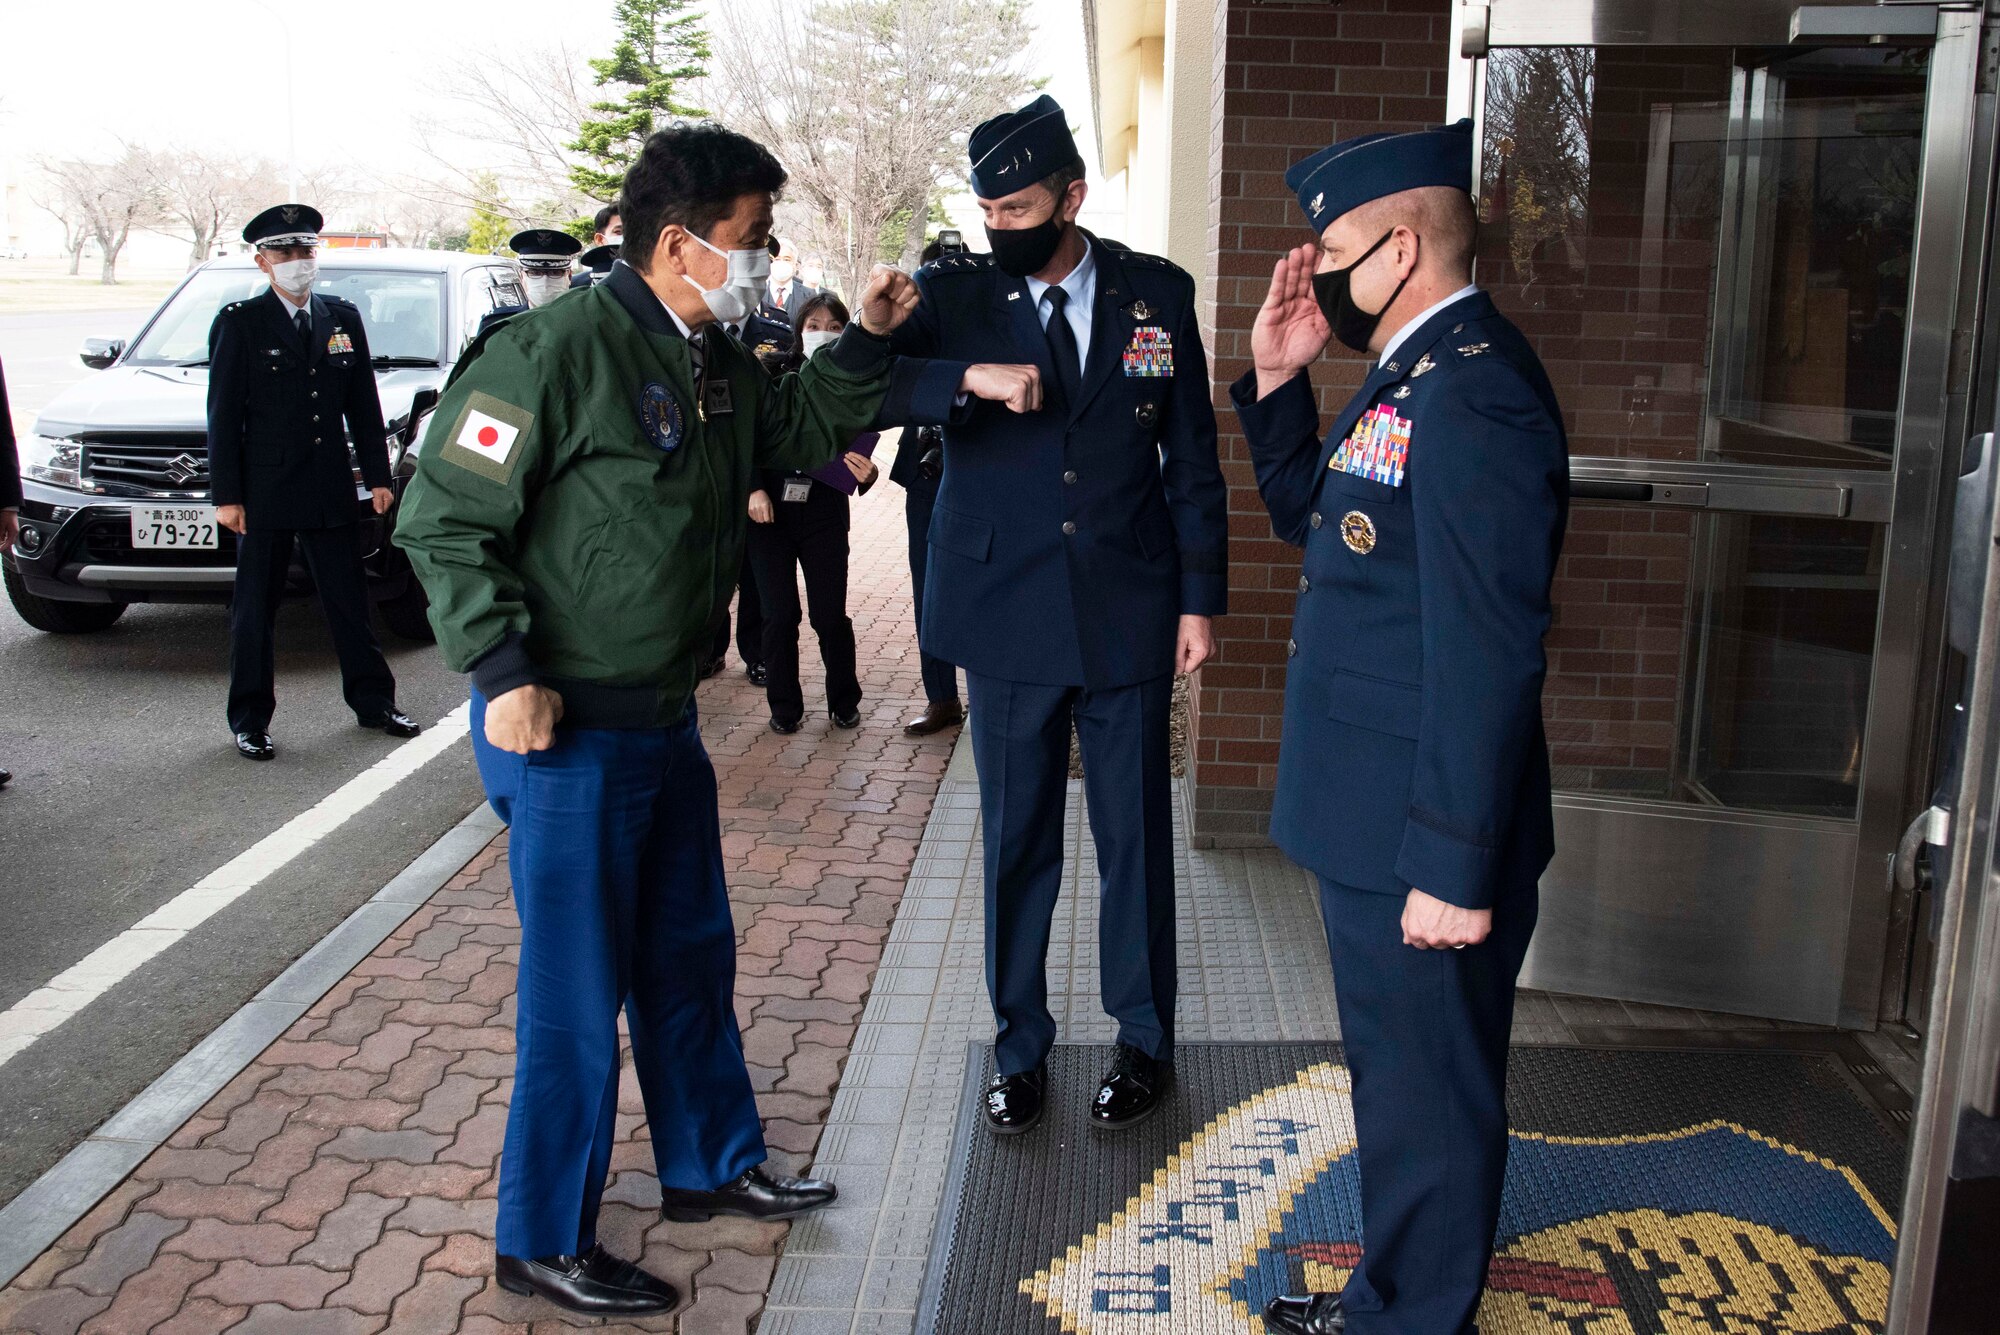 Japan Minister of Defense, Nobuo Kishi, is greeted by Lt. Gen. Kevin Schneider, U.S. Forces Japan and 5th Air Force commander, and saluted by Col. Jesse Friedel, 35th Fighter Wing commander, during a visit at Misawa Air Base on April 3, 2021. During the visit, Minister of Defense Kishi received briefings about the F-16 Fighting Falcon, and the 35th FW’s mission to defend Japan with advanced Suppression of Enemy Air Defense and Destruction of Enemy Air Defense capabilities. SEAD and DEAD capabilities are critical to maintaining credible deterrence and defense in the Indo-Pacific region. (U.S. Air force photo by Maj. Cody Chiles)